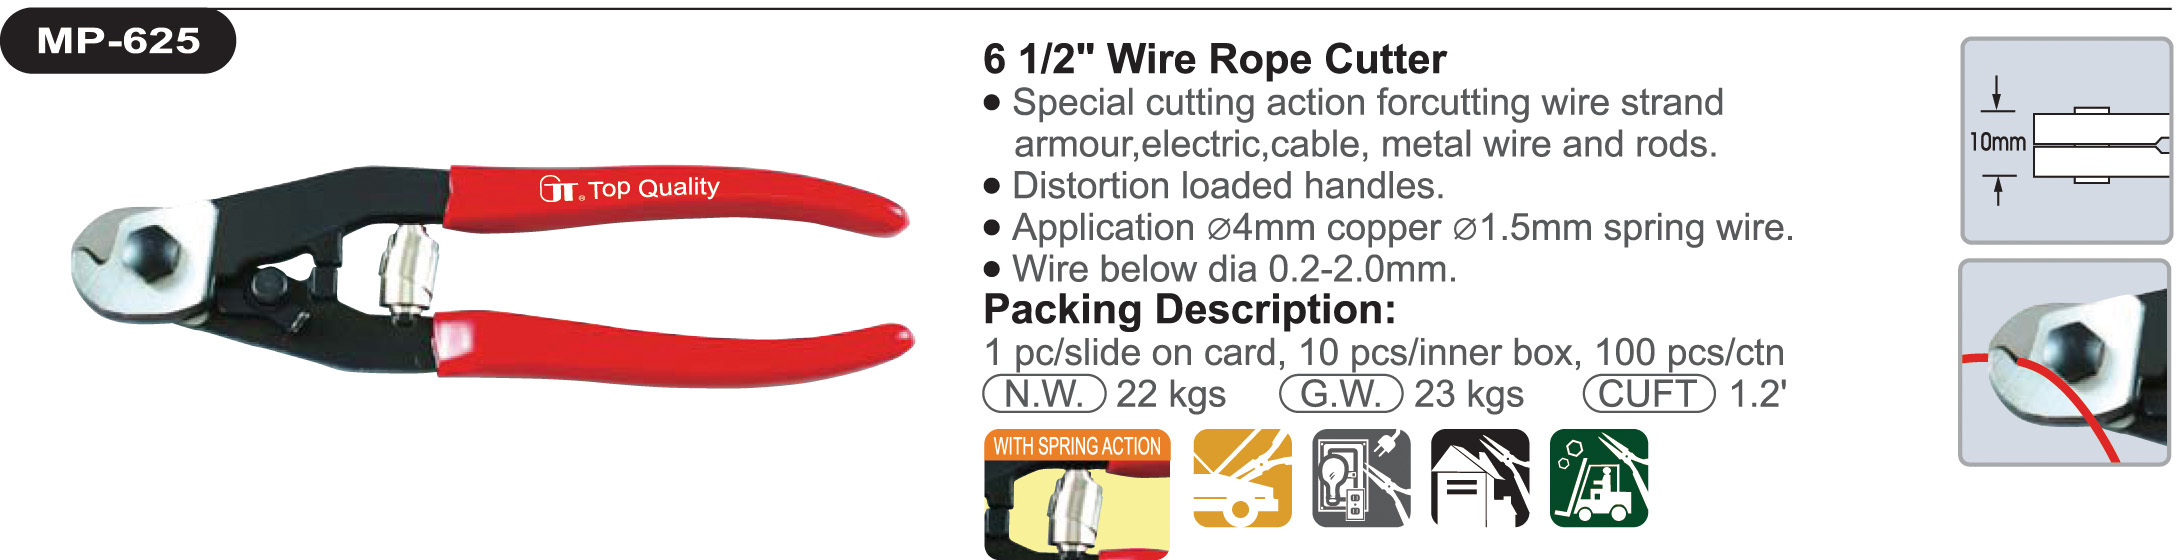 proimages/product/pliers/cable_and_wire_rope_cutter/WIRE_ROPE_CUTTERS/MP-625/MP-625.jpg